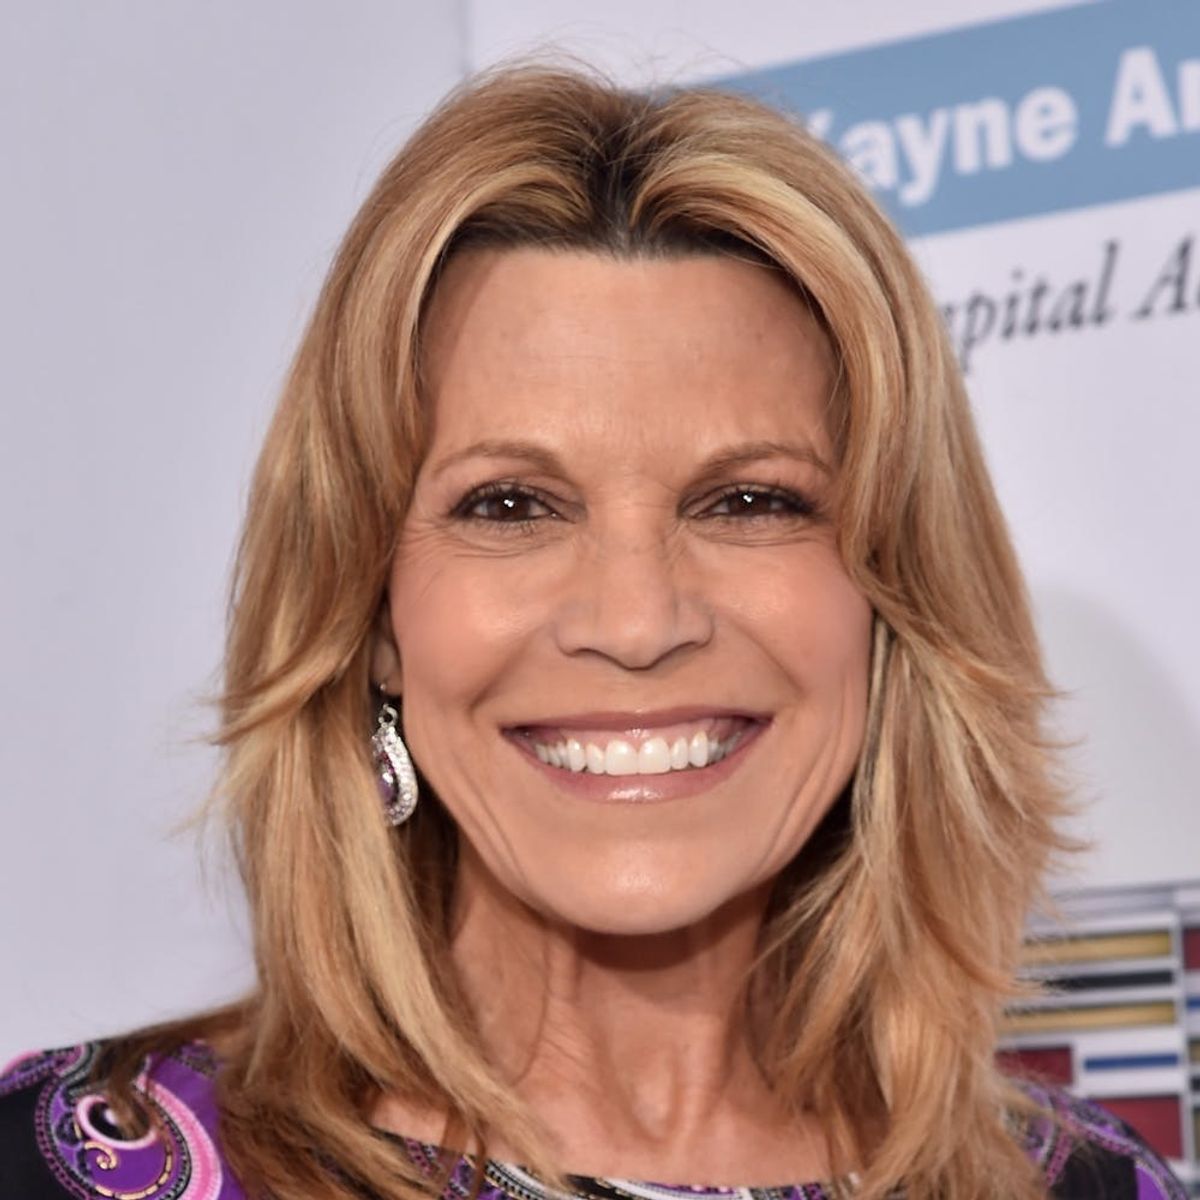 Vanna White’s Wheel of Fortune Dress Count Will Blow Your Mind